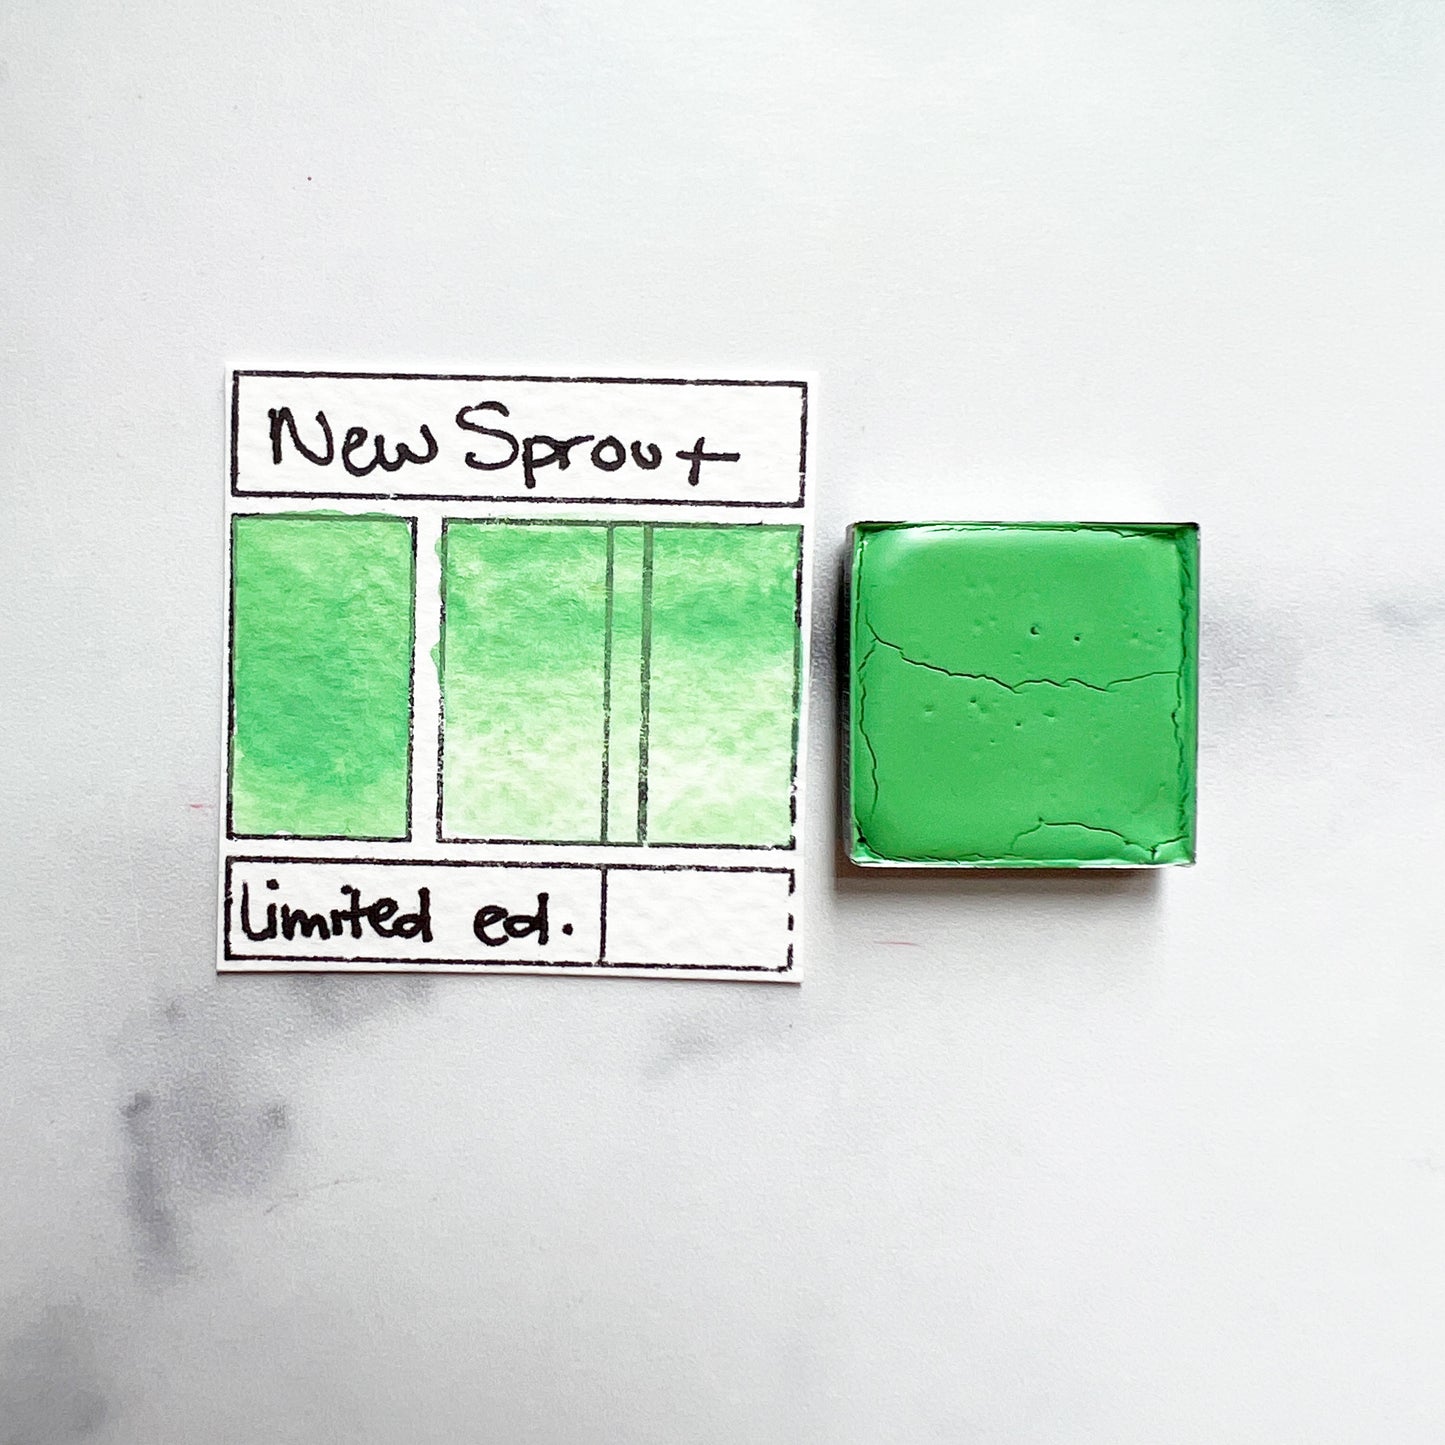 New Sprout. Half pan or bottle cap of handmade watercolor paint